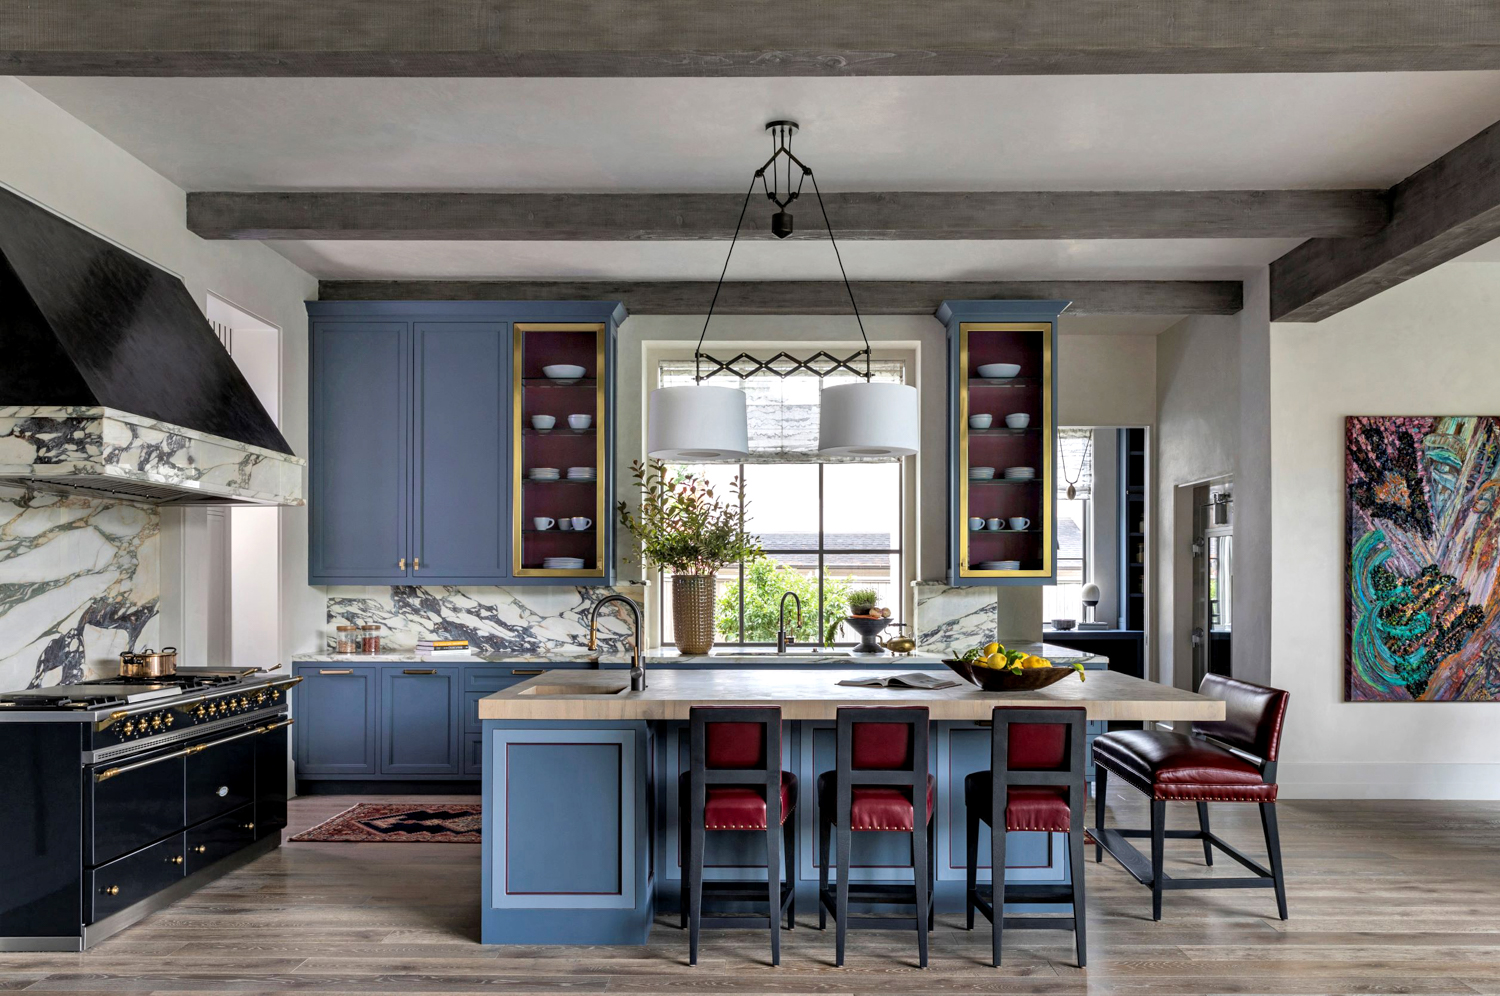 Red and black upholstered barstools line a denim-colored island with butcherblock slab. RED Winner.